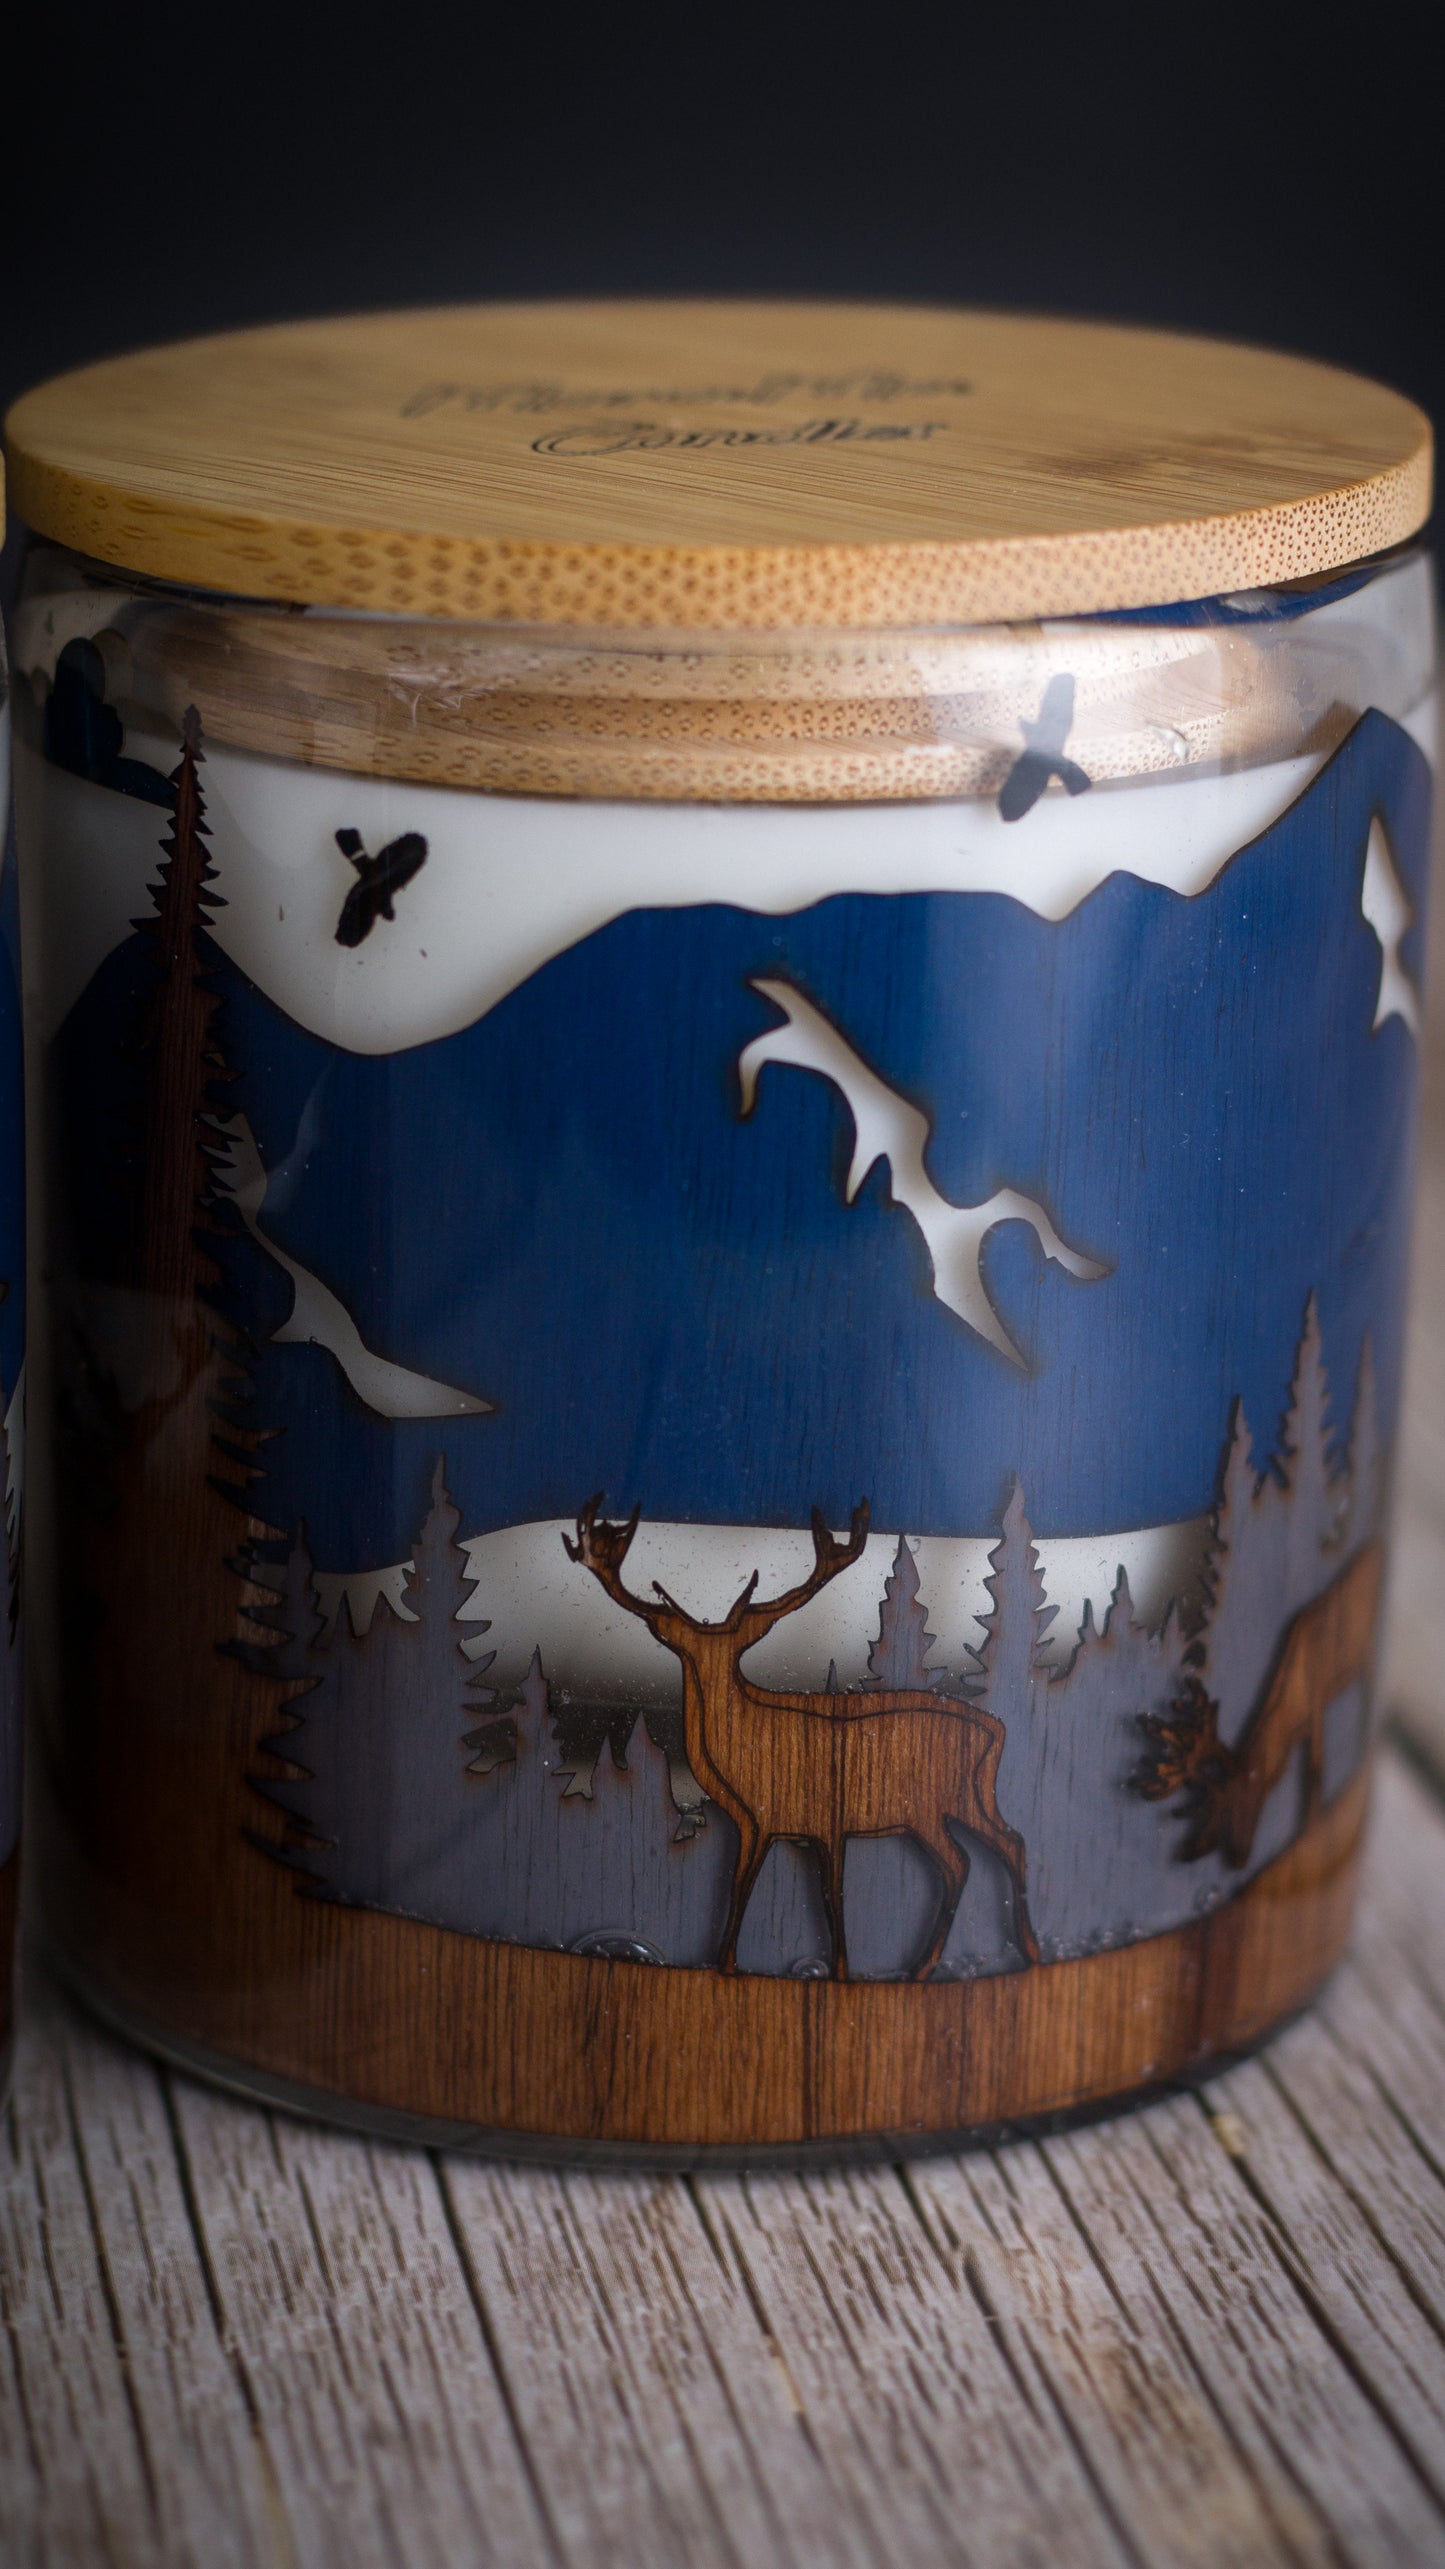 Soy Candle in Handmade Candlestick "Couple Deer in Woods"